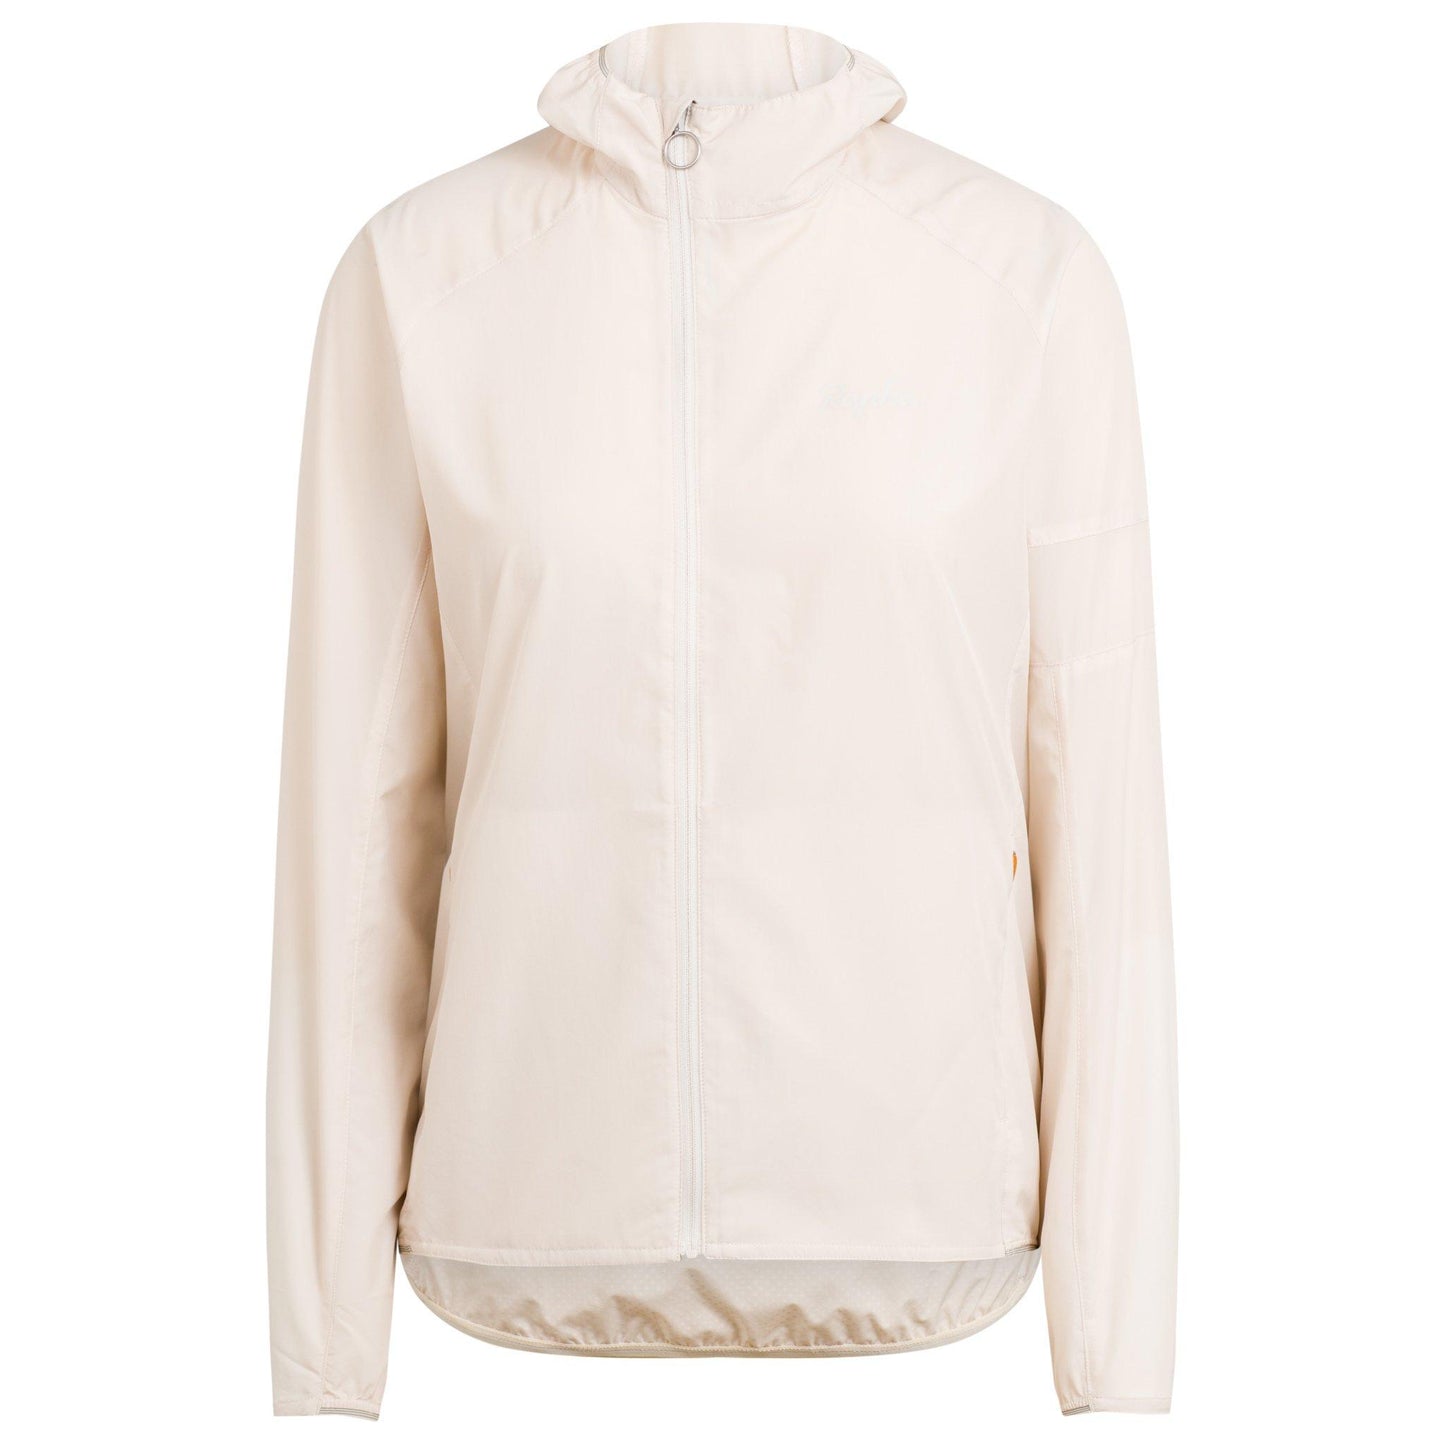 Rapha Womens Commuter Lightweight Jacket, Off-White buy at Woolys Wheels Sydney with free delivery